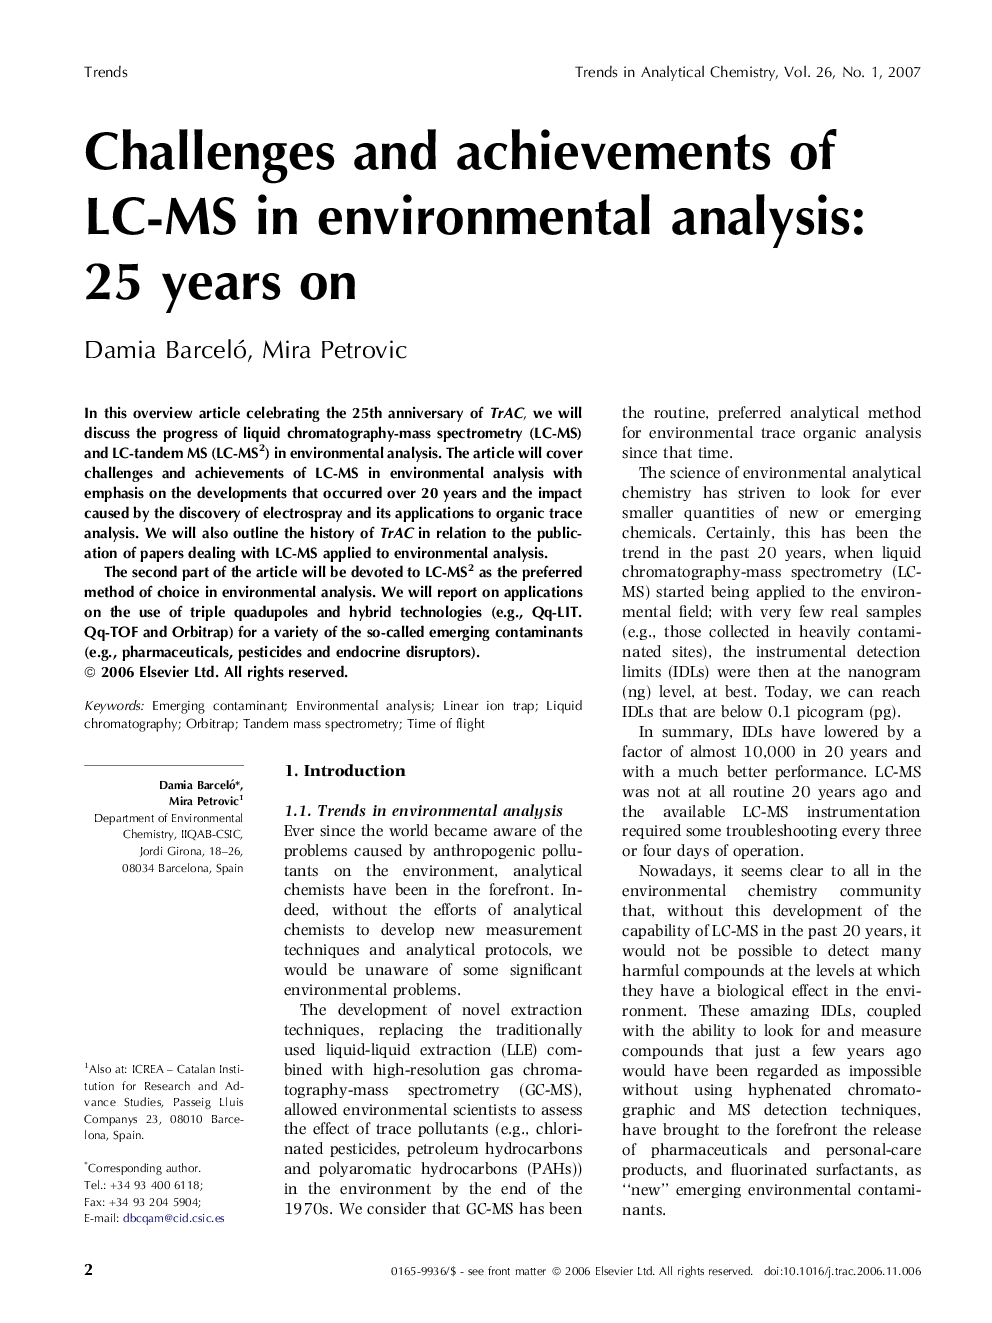 Challenges and achievements of LC-MS in environmental analysis: 25 years on